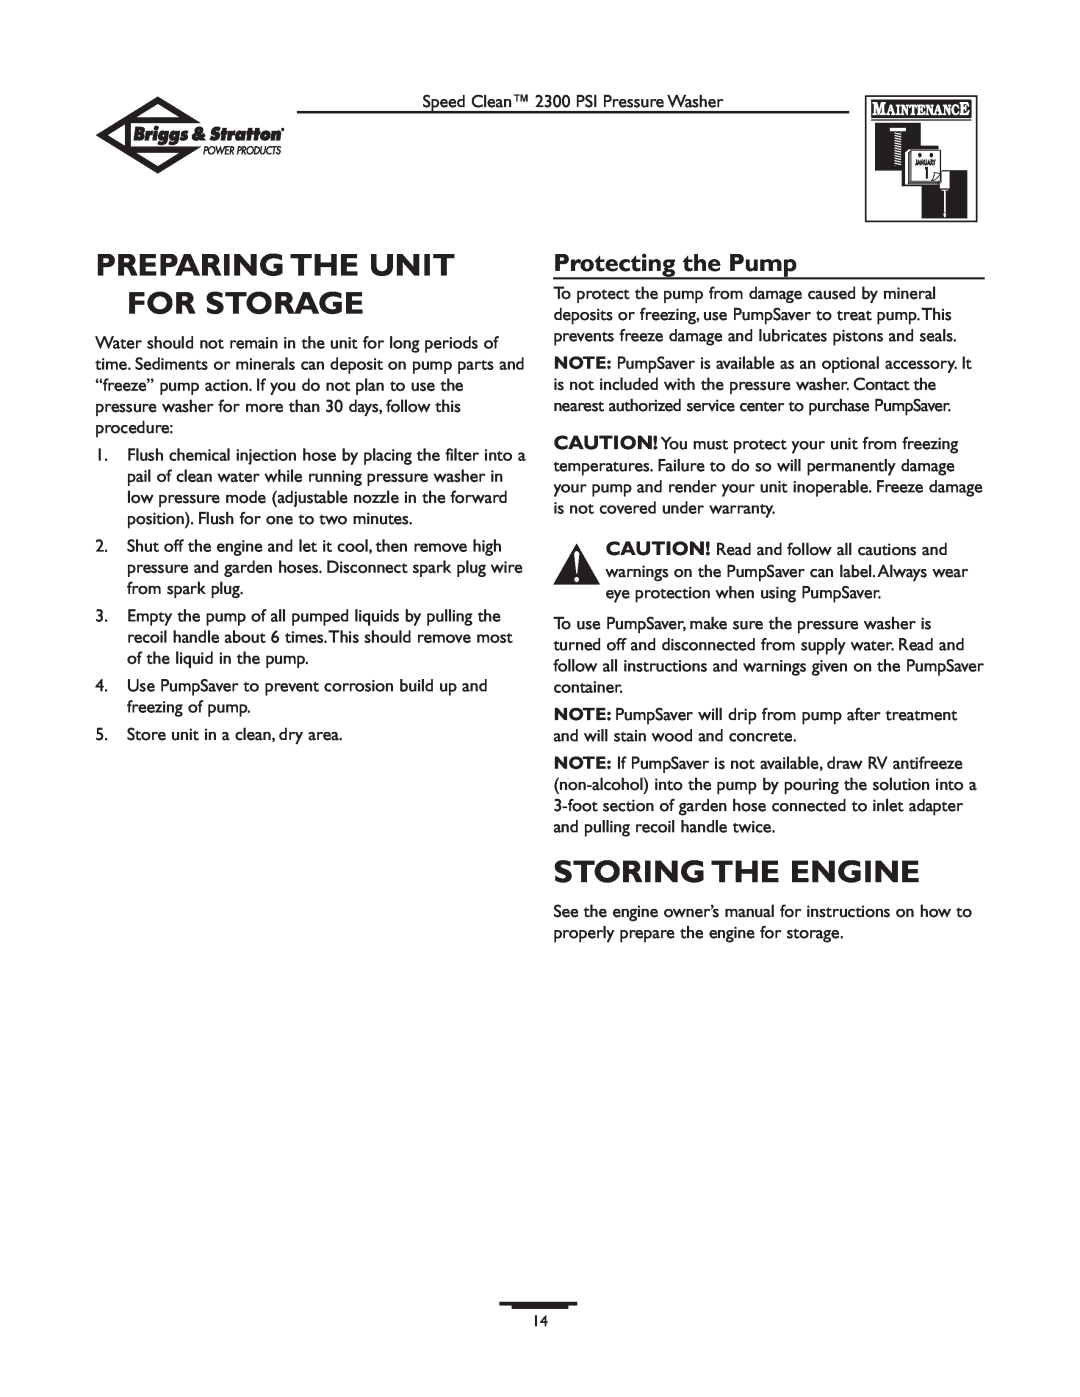 Briggs & Stratton 1909-0 owner manual Preparing The Unit For Storage, Storing The Engine, Protecting the Pump 